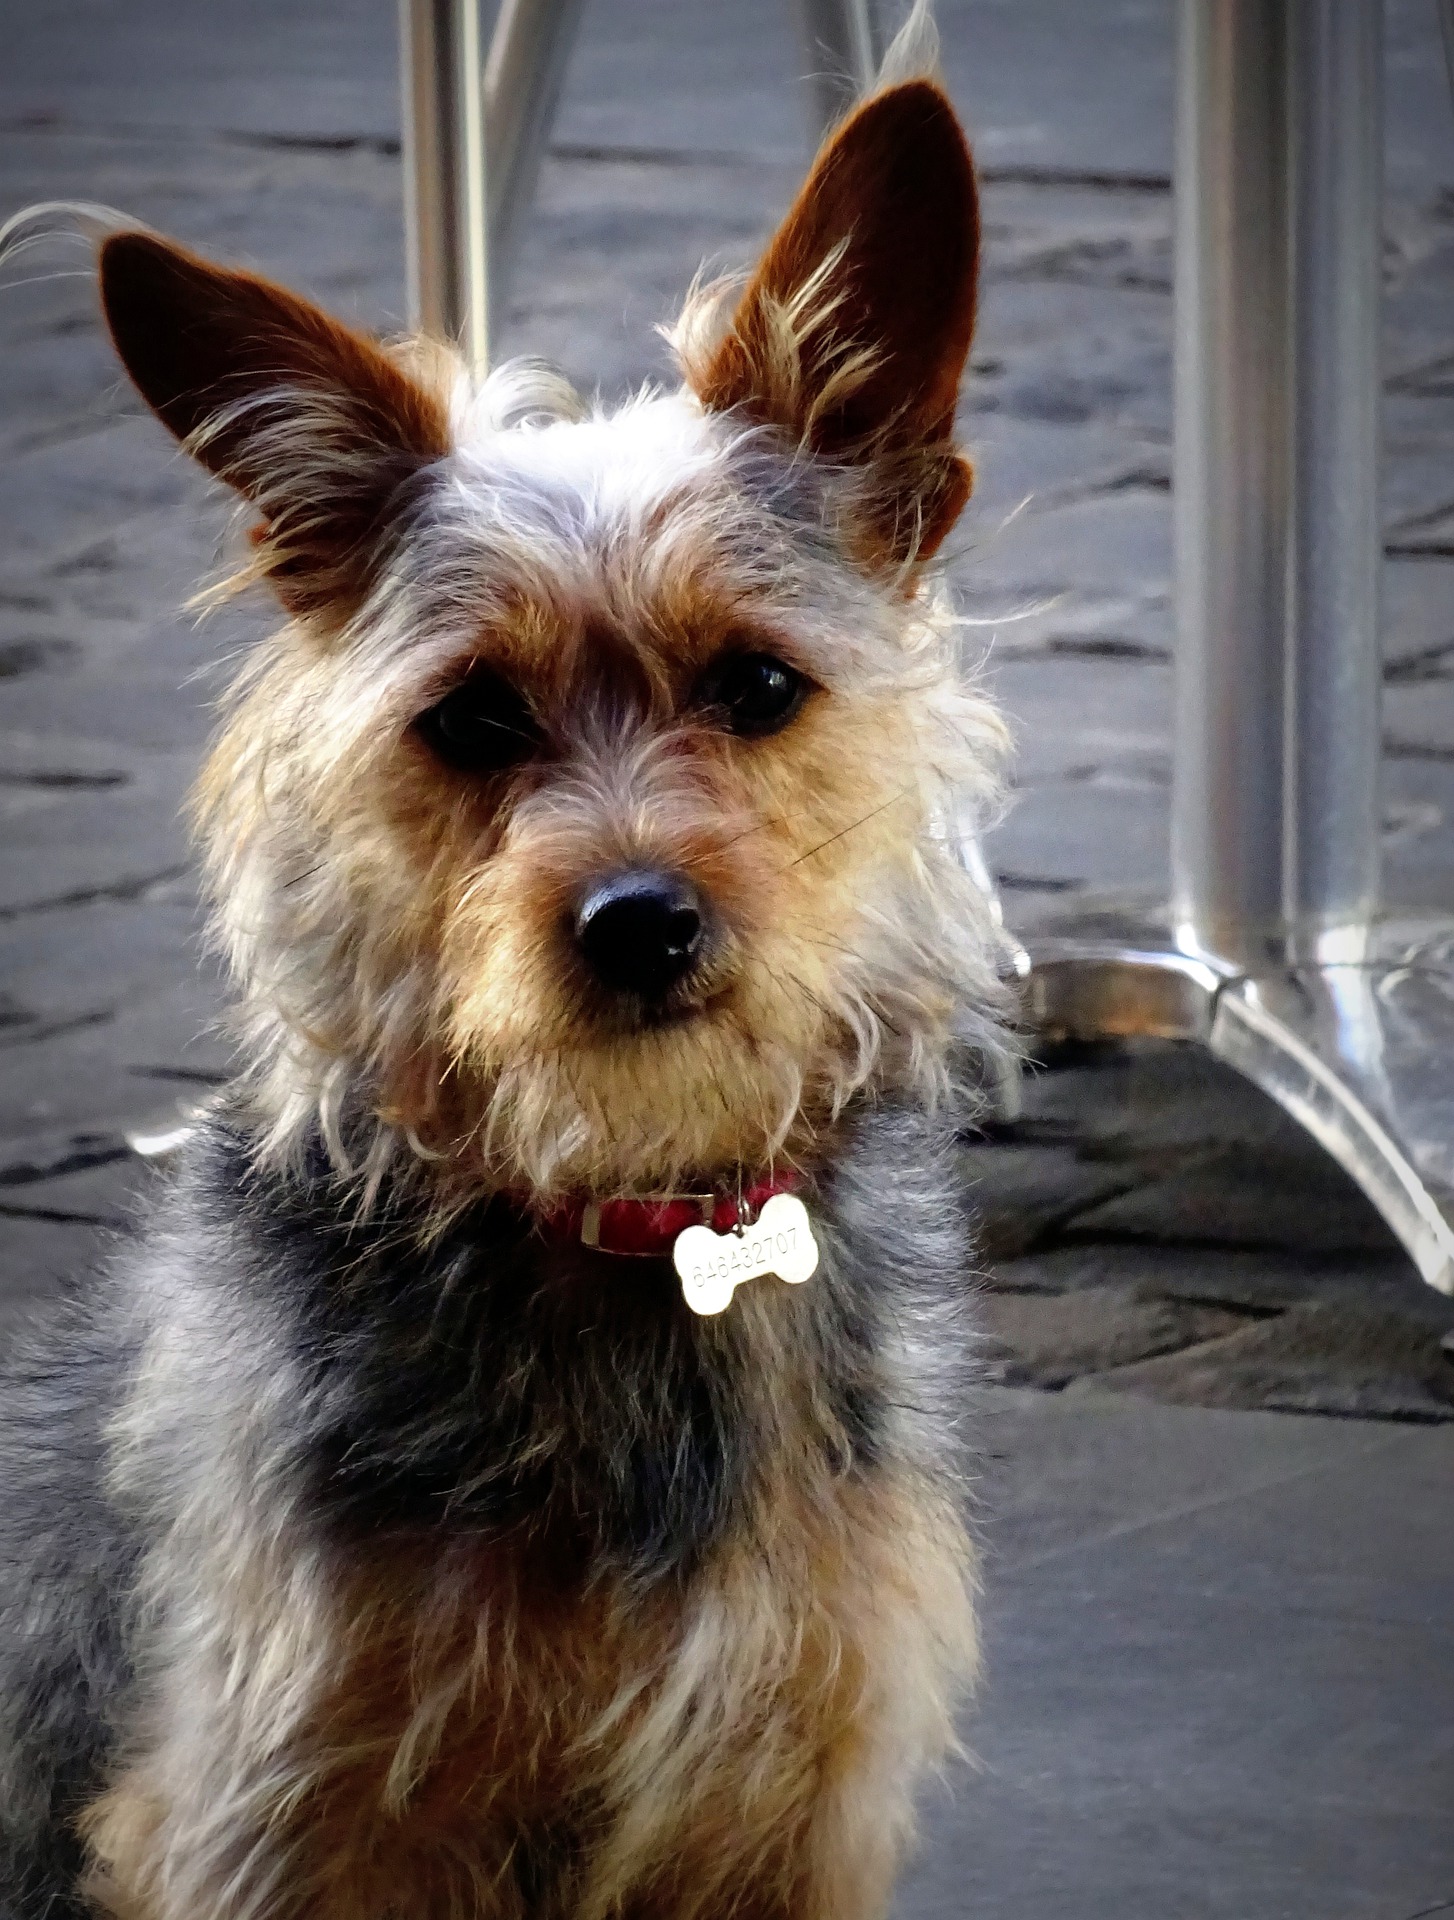 Image of scruffy dog wearing a red collar and dog tag.